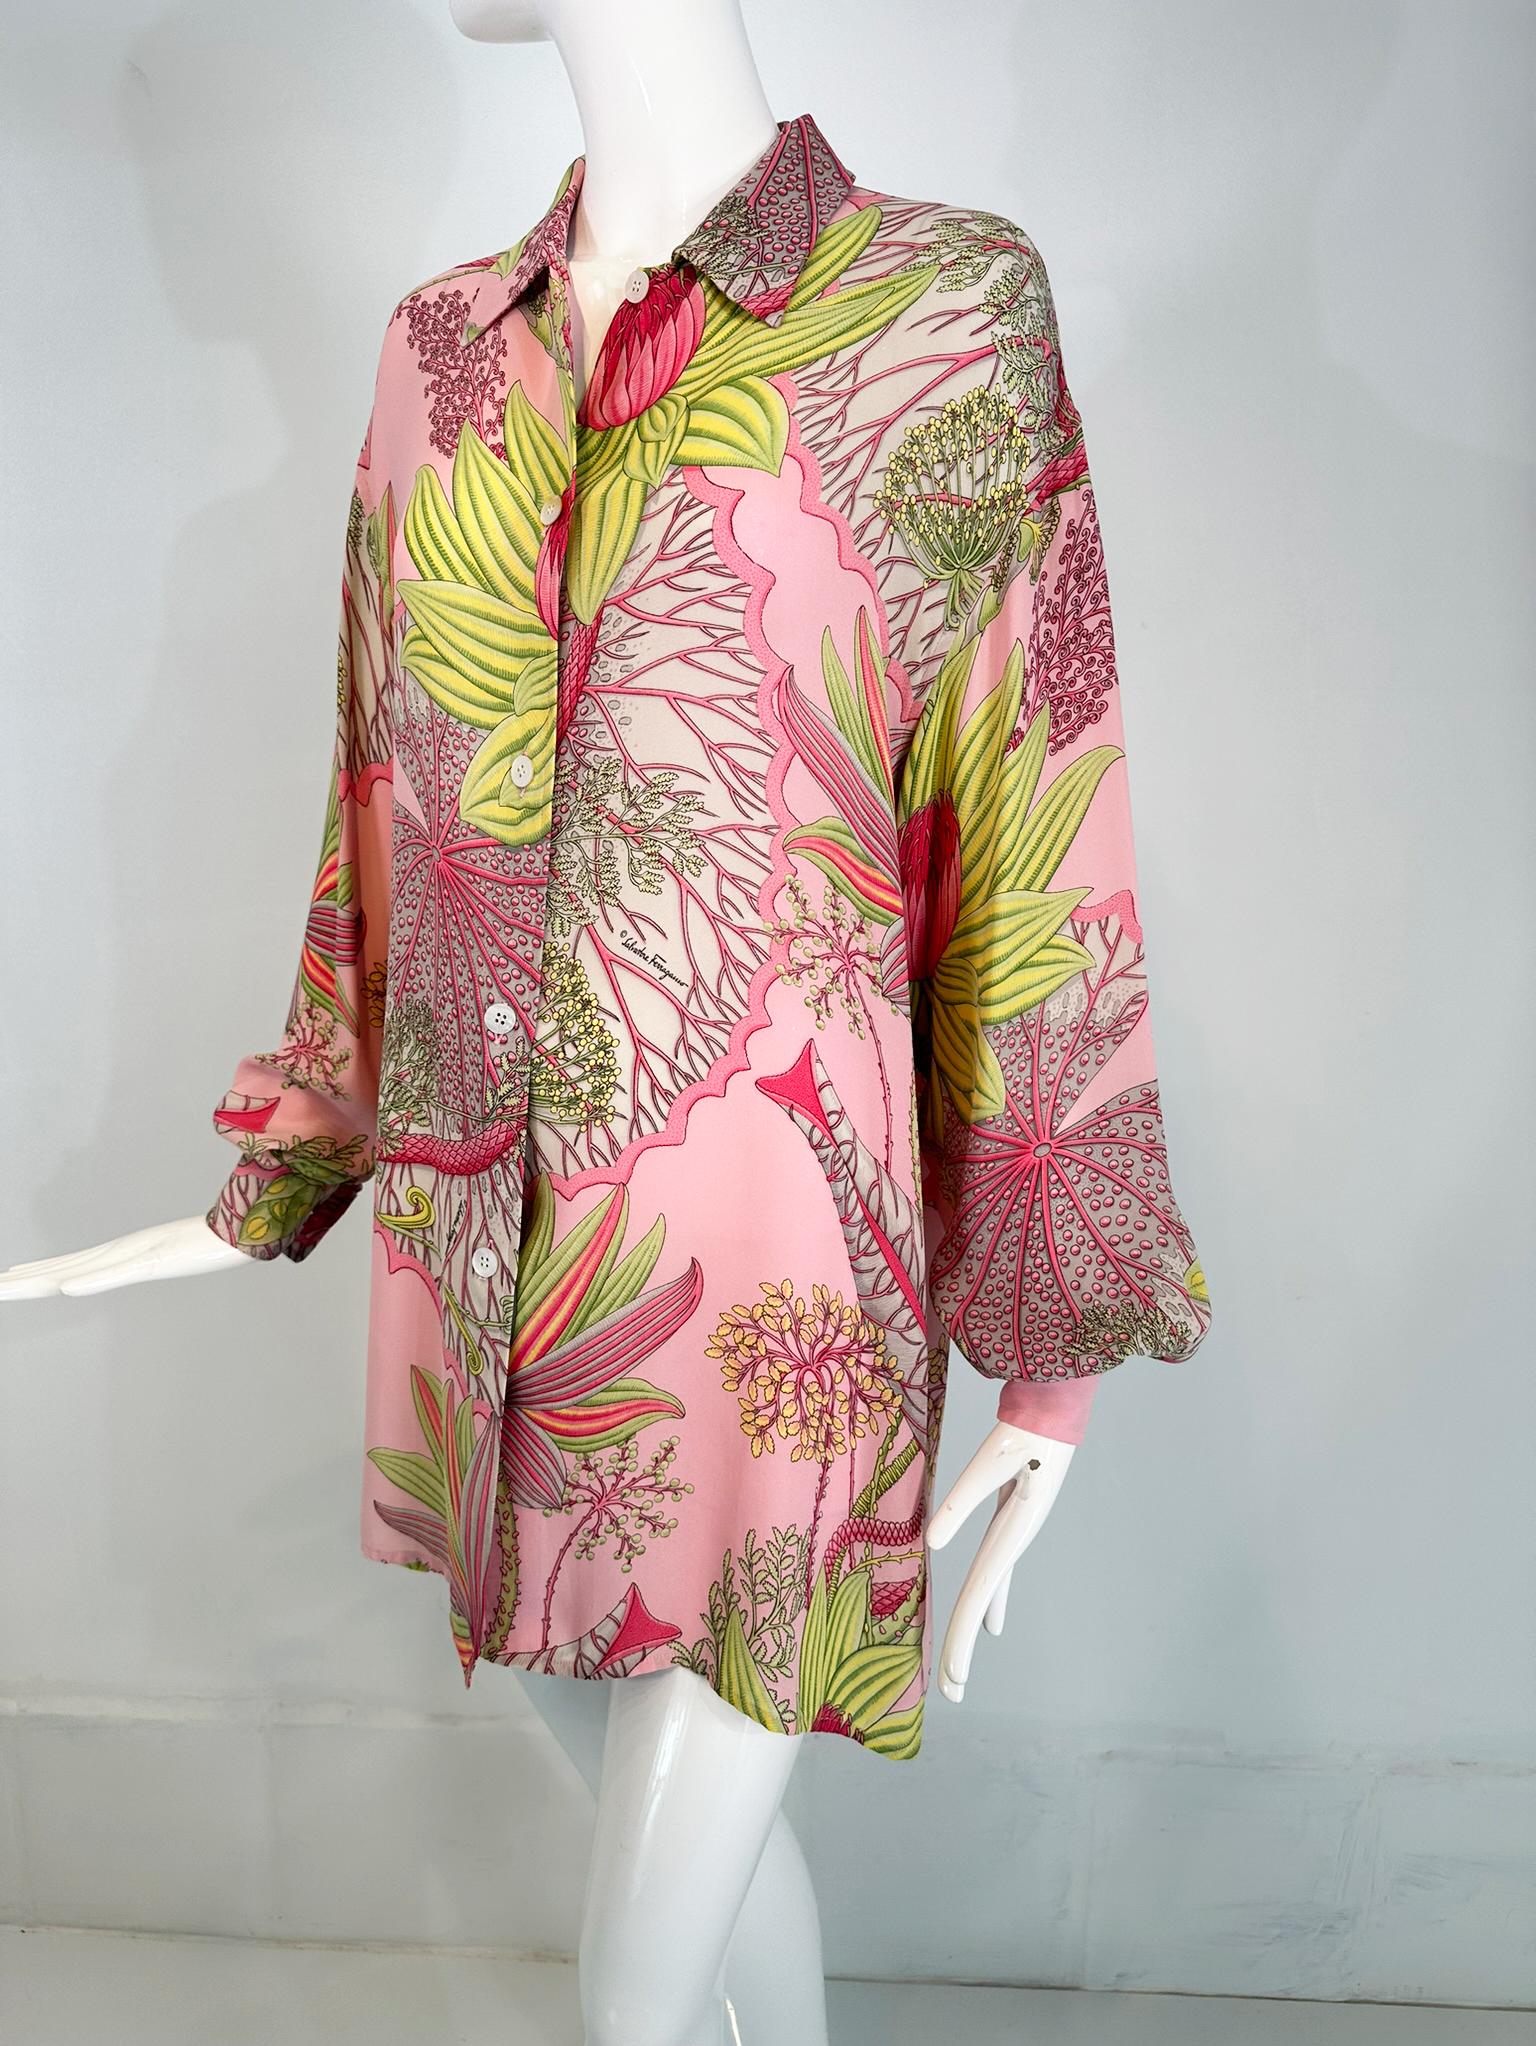 Salvatore Ferragamo 1990s silk crepe tropical foliage oversize blouse tunic. This beautiful blouse is done with a pink ground and an assortment of tropical foliage throughout. Long sleeve blouse with button cuffs. Small collar, Button front blouse